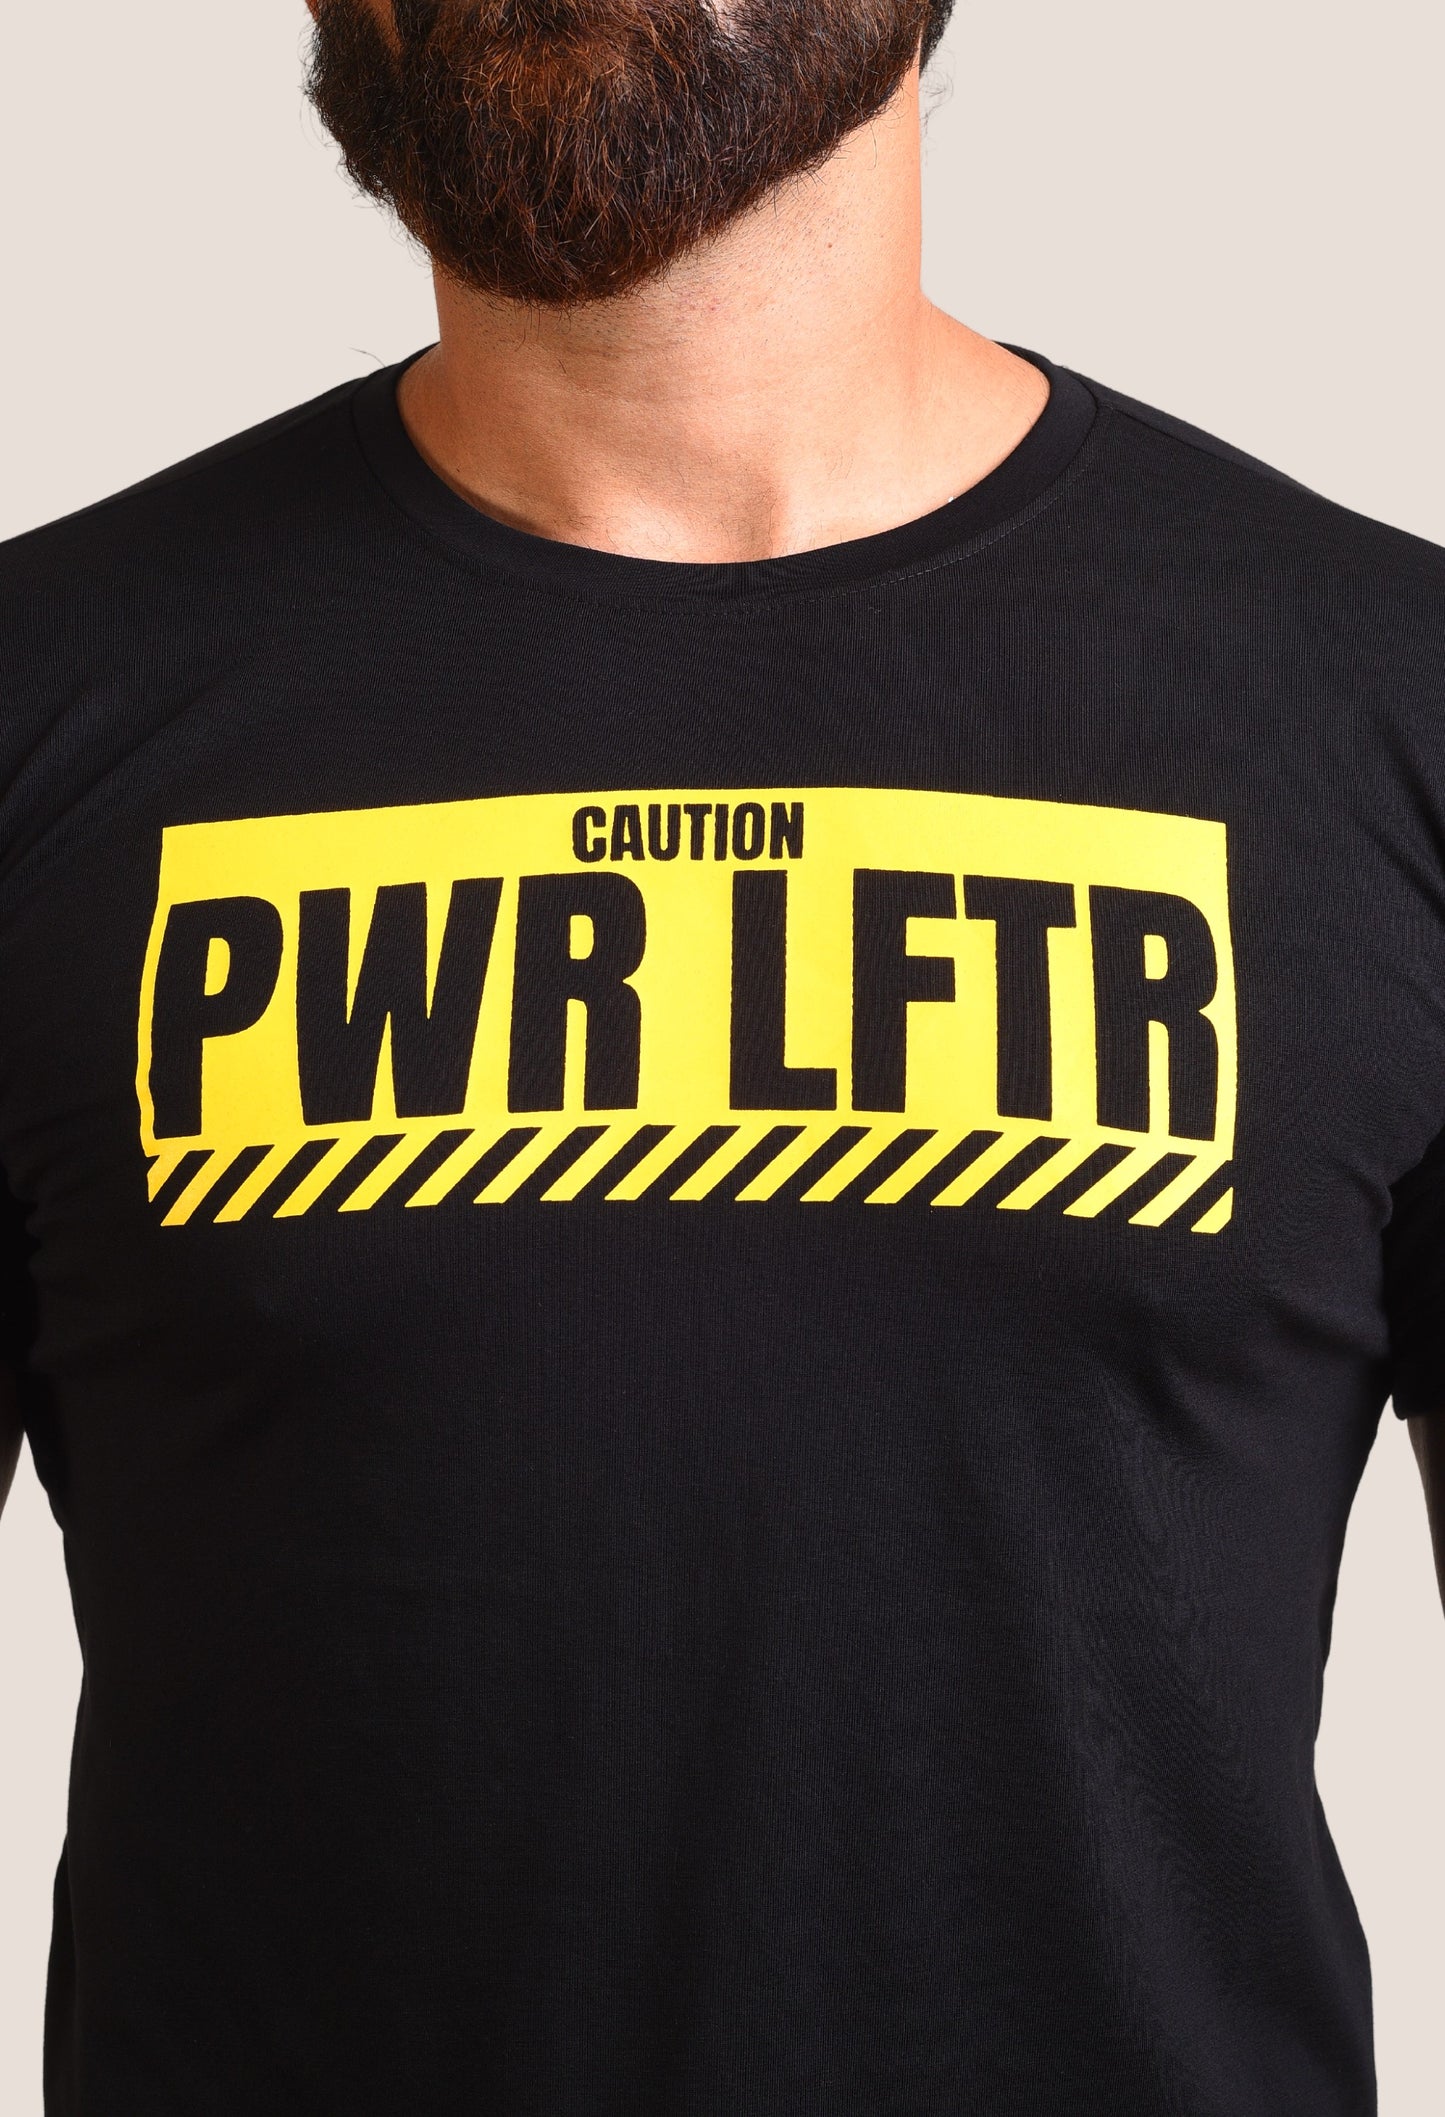 Gym T Shirt - Caution Power Lifter - Men T-Shirt with premium cotton Lycra. The Sports T Shirt by Strong Soul